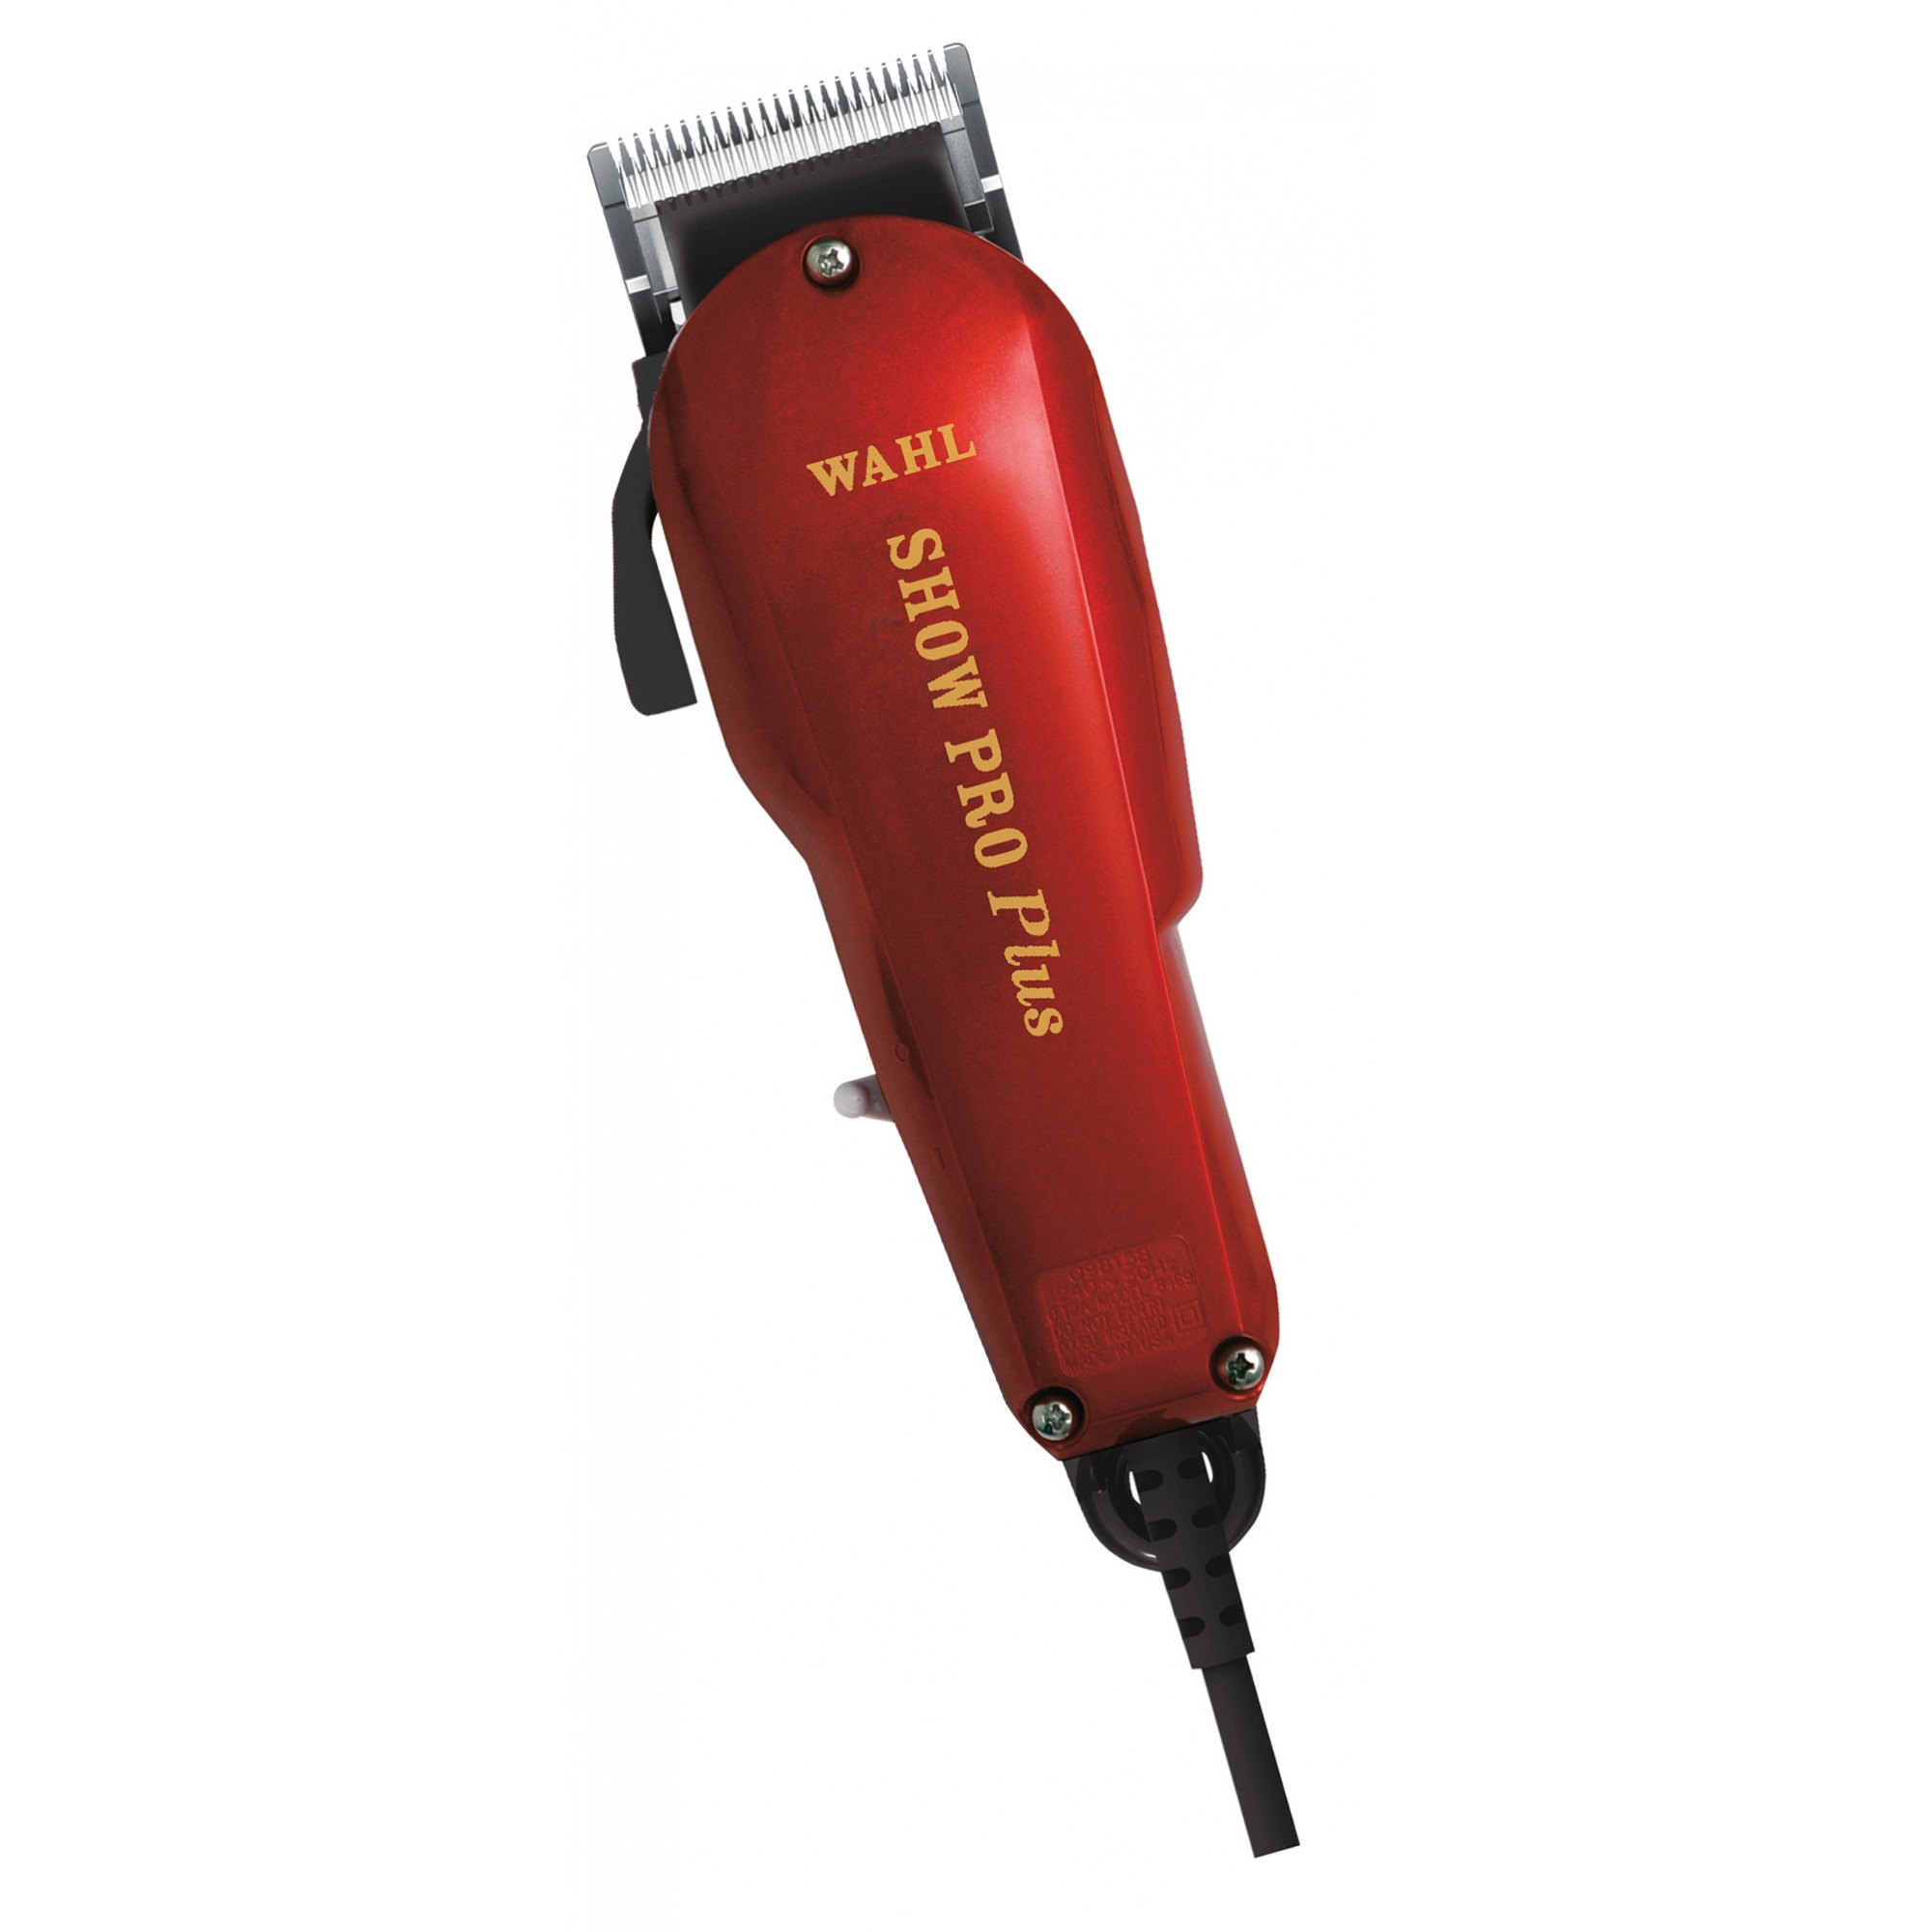 wahl horse clippers